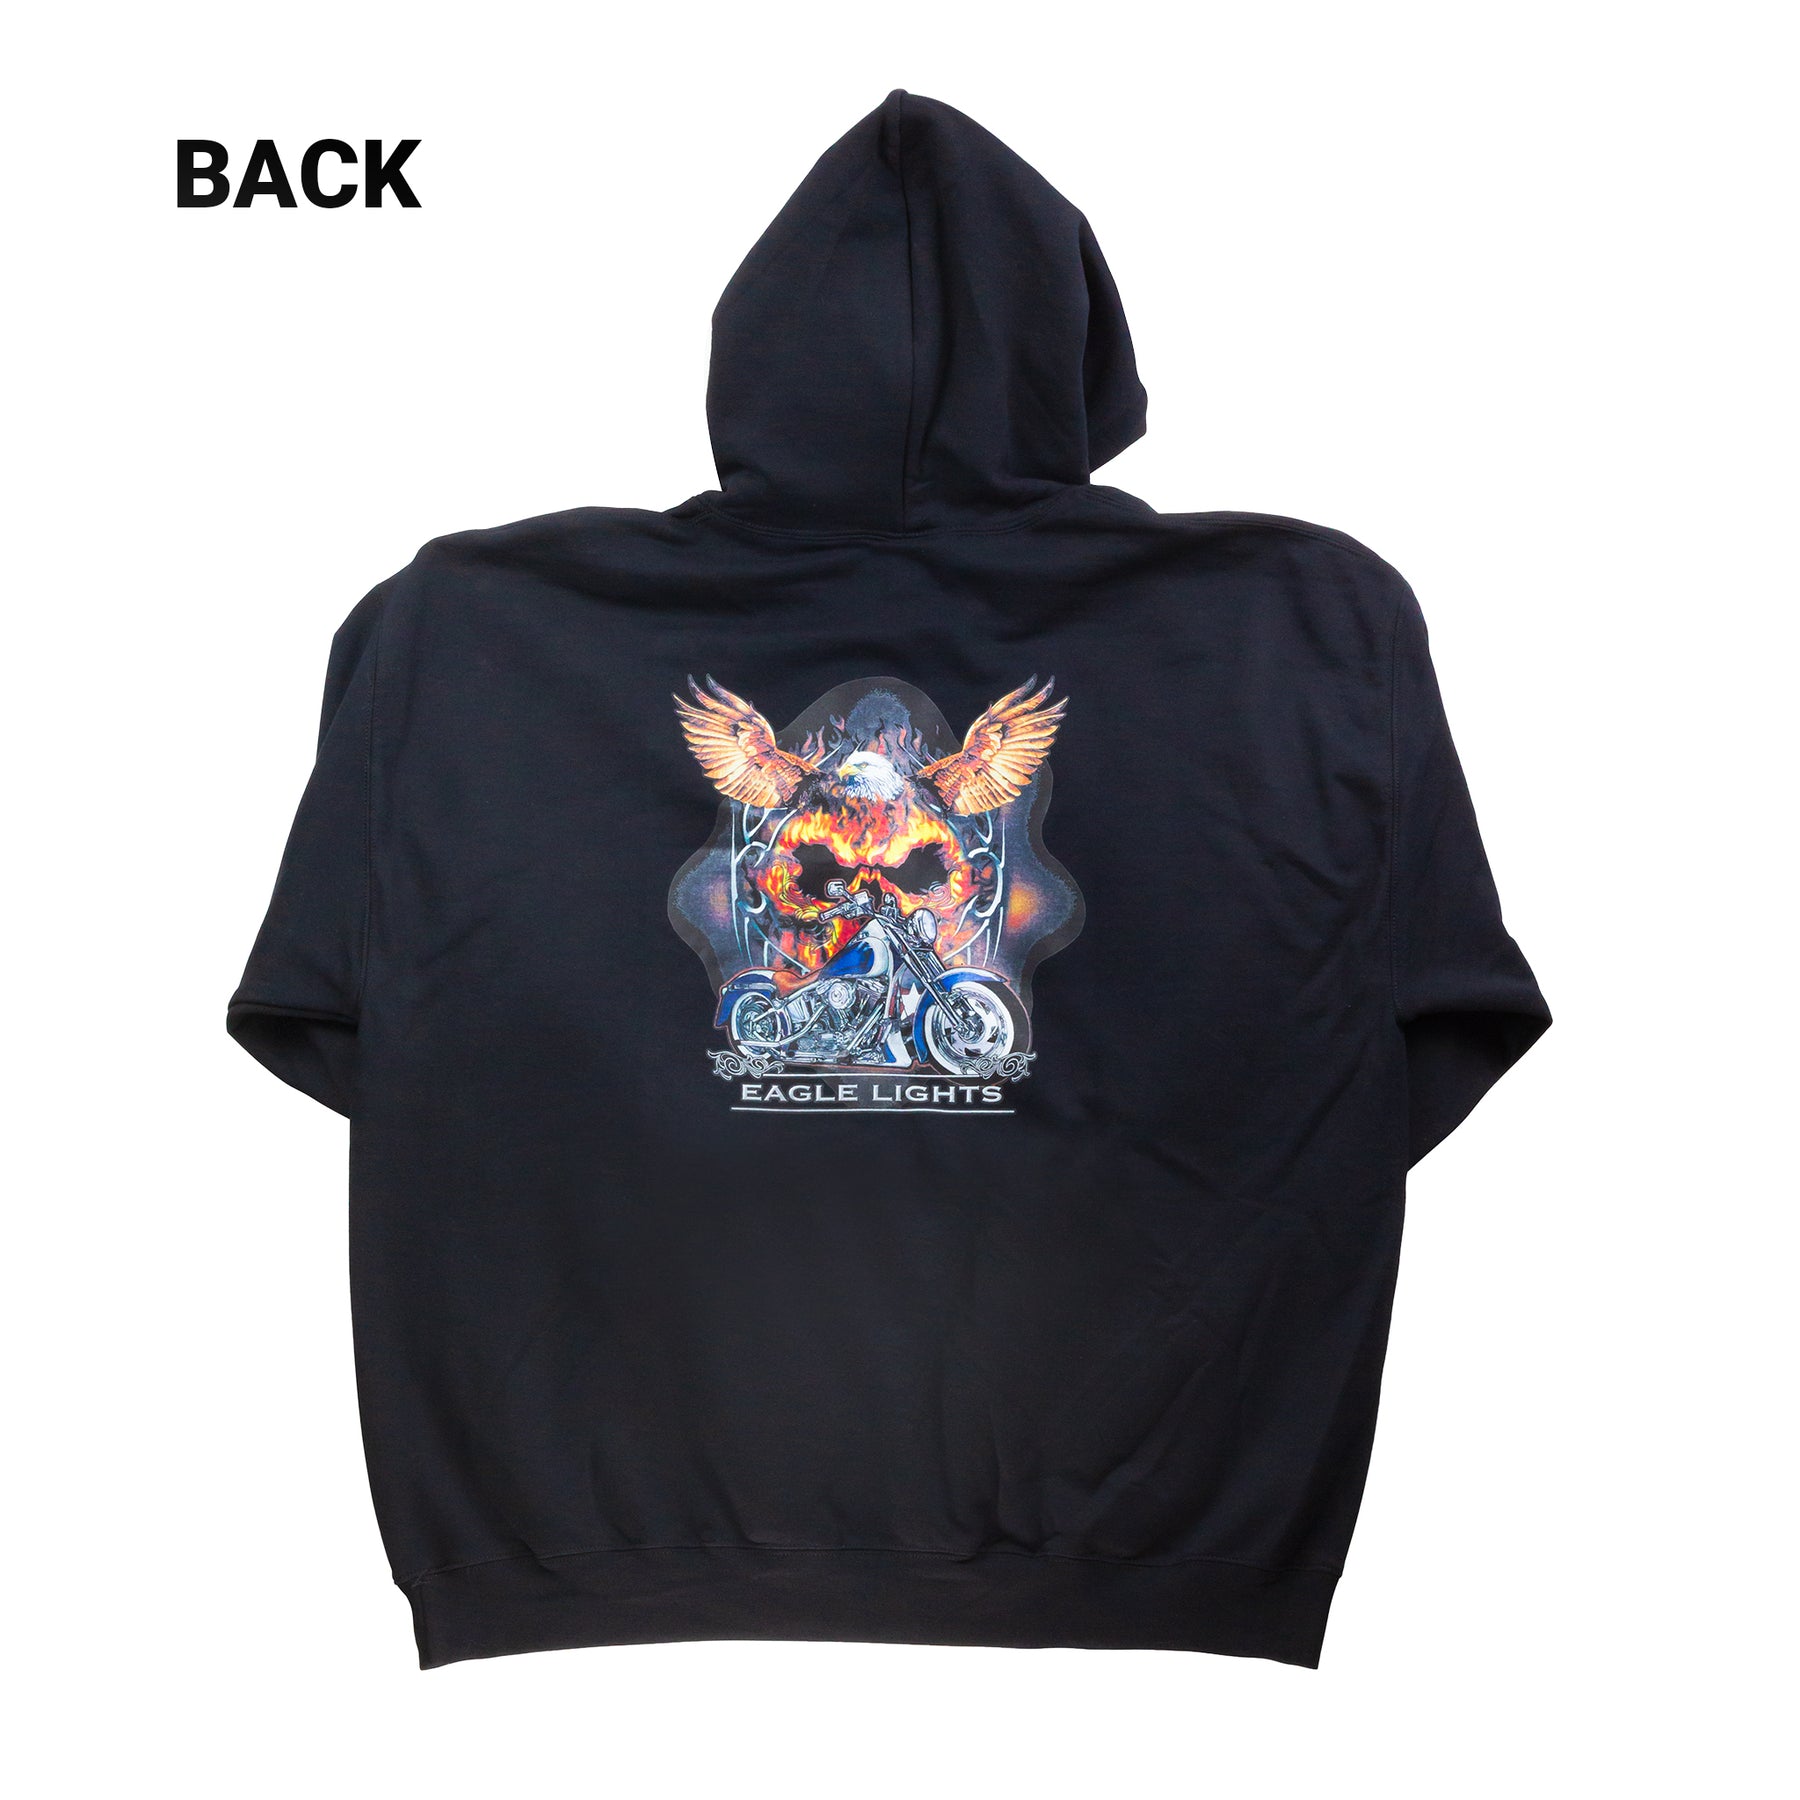 Eagle Lights Hoodie with Flaming Skull and Eagle Graphic